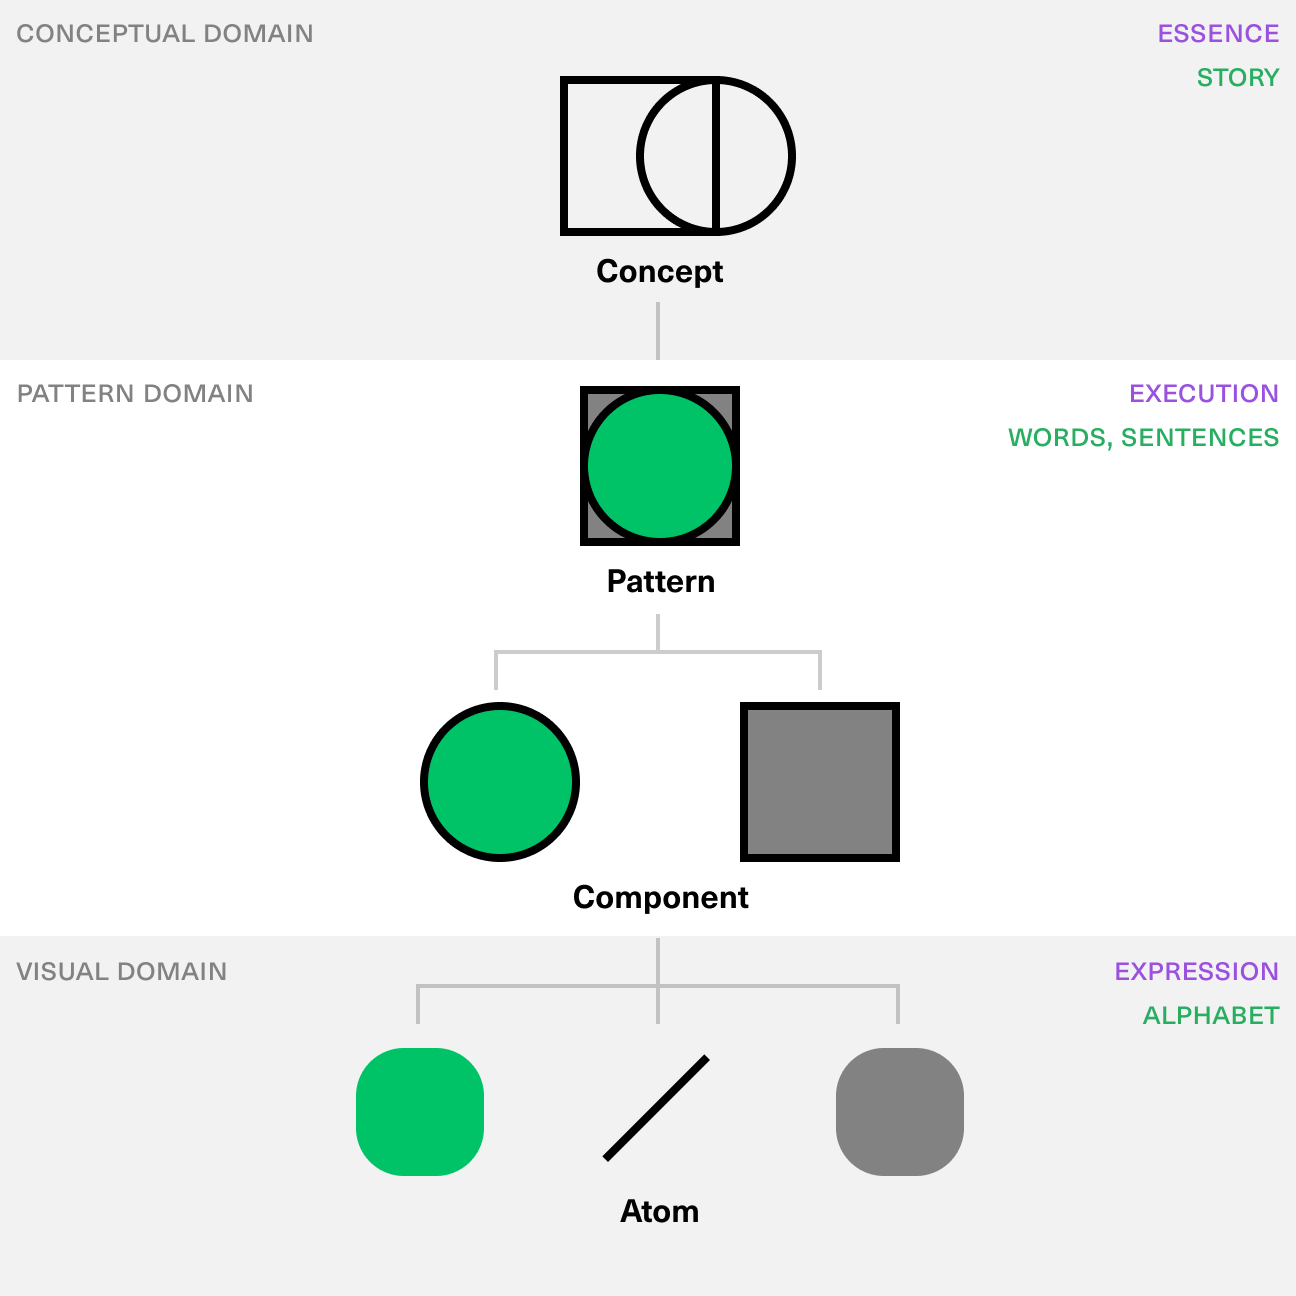 A diagram of the “domains” of a design system